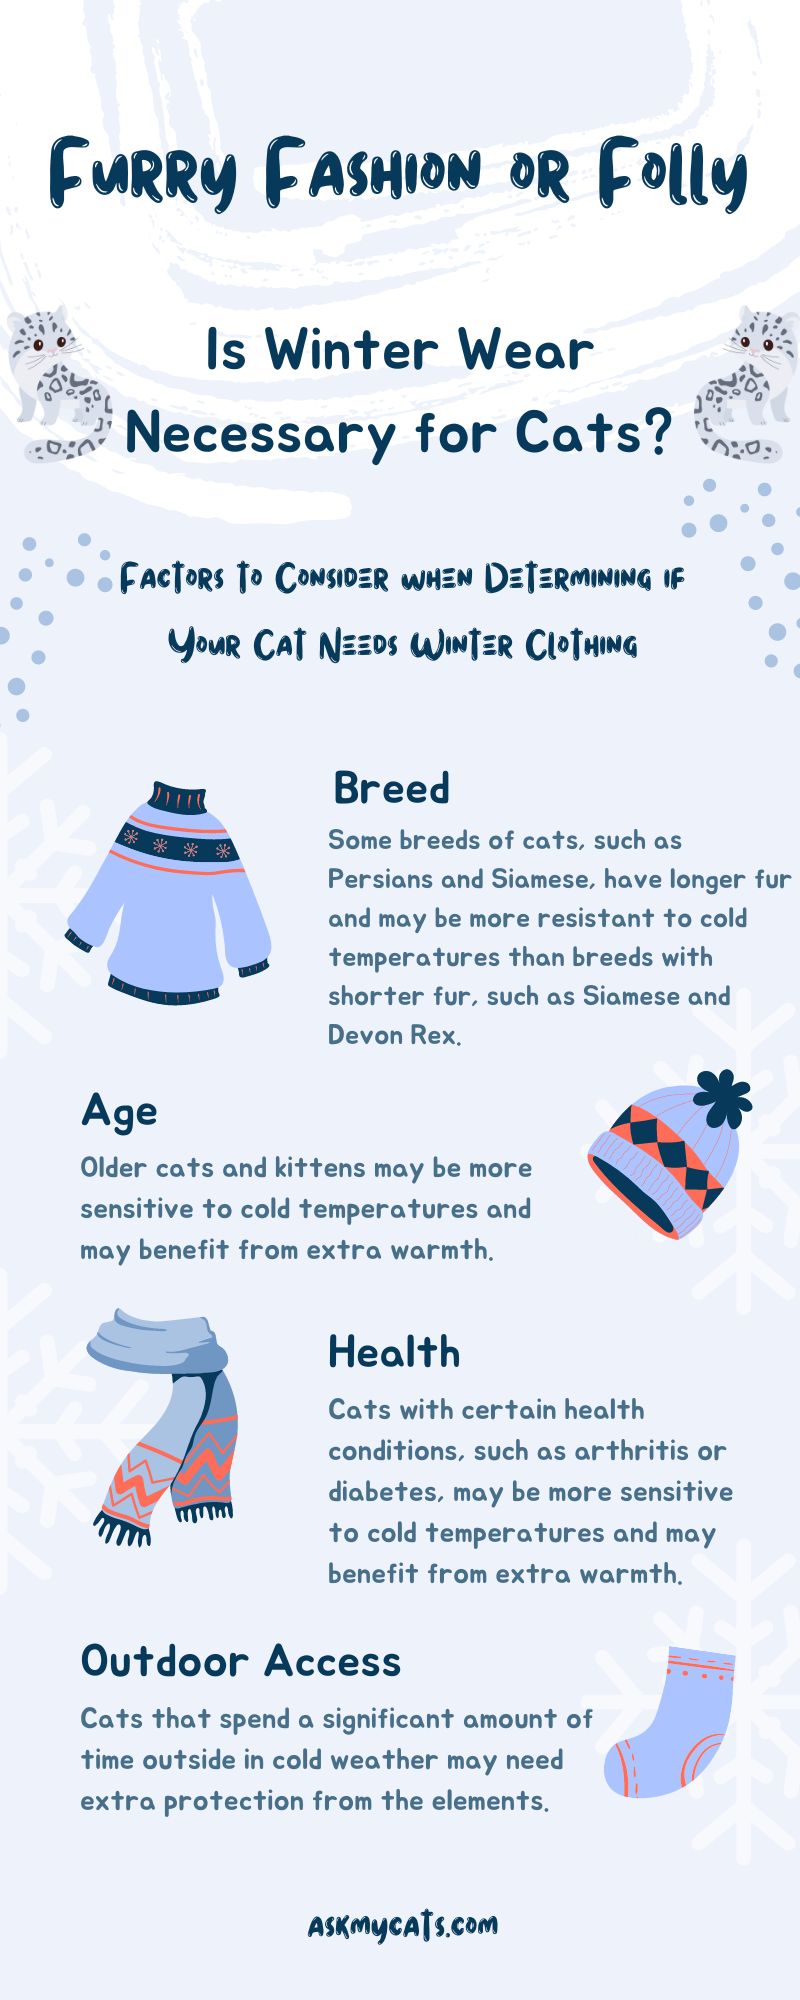 Is Winter Wear Necessary for Cats?